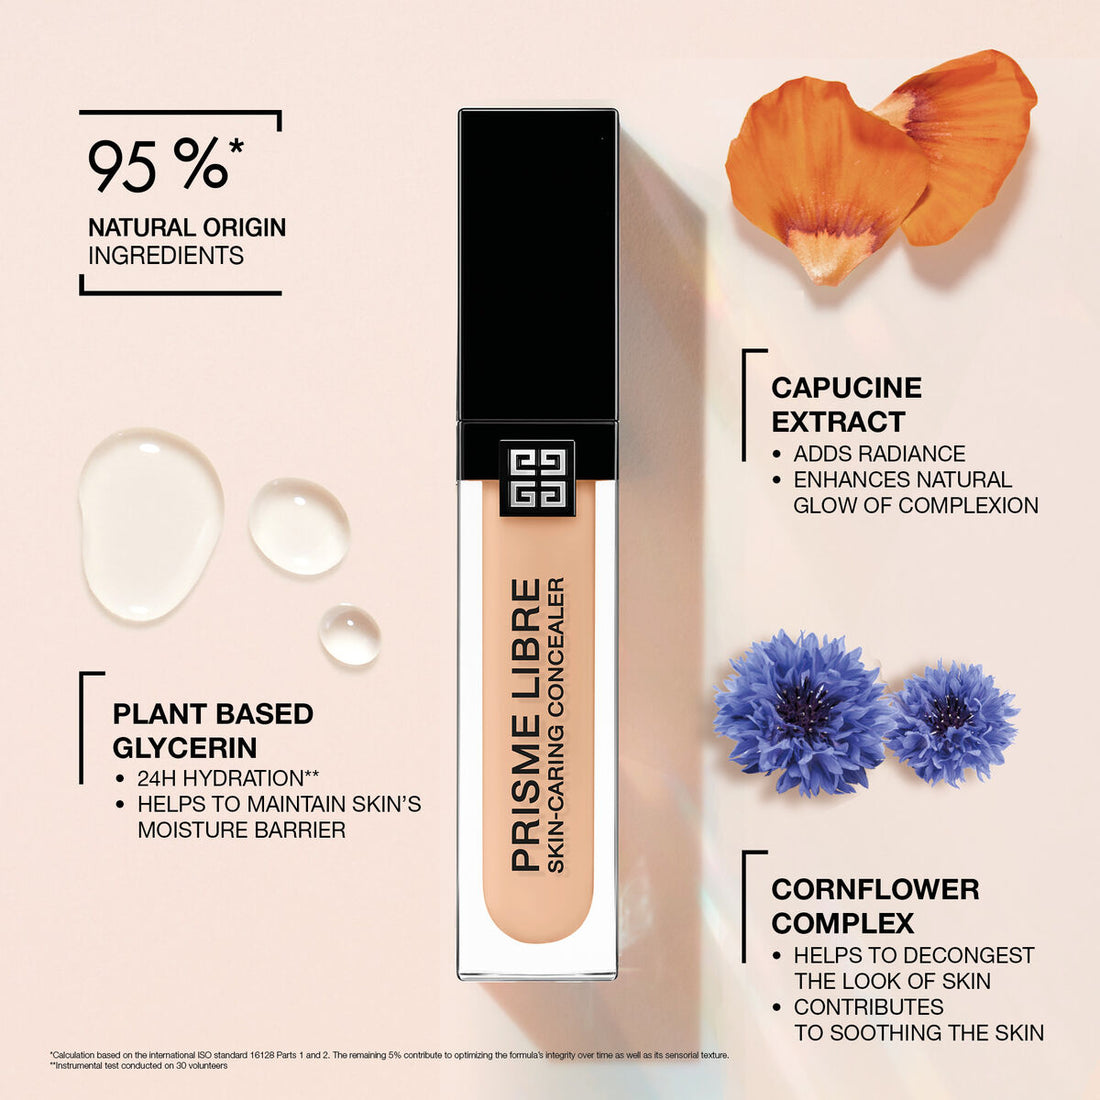 GIVENCHY PRISME LIBRE SKIN-CARING 24H HYDRATING & CORRECTING MULTI-USE CONCEALER-N80 ( 11ml )